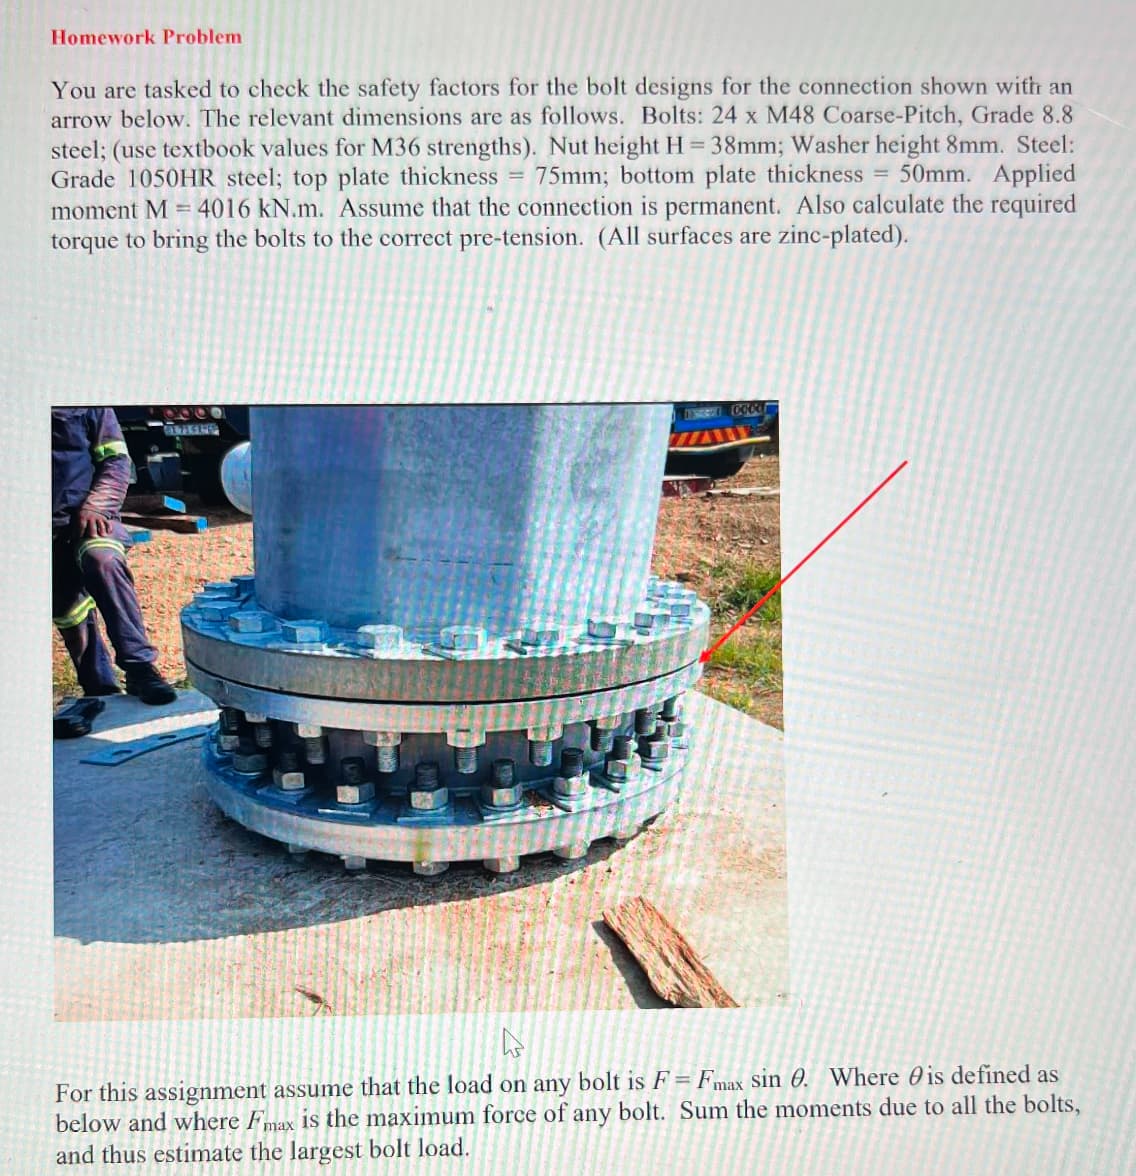 Homework Problem
You are tasked to check the safety factors for the bolt designs for the connection shown with an
arrow below. The relevant dimensions are as follows. Bolts: 24 x M48 Coarse-Pitch, Grade 8.8
steel; (use textbook values for M36 strengths). Nut height H = 38mm; Washer height 8mm. Steel:
Grade 1050HR steel; top plate thickness = 75mm; bottom plate thickness = 50mm. Applied
moment M = 4016 kN.m. Assume that the connection is permanent. Also calculate the required
torque to bring the bolts to the correct pre-tension. (All surfaces are zinc-plated).
955
ESS 0000
D
For this assignment assume that the load on any bolt is F = Fmax sin 0. Where is defined as
below and where Fmax is the maximum force of any bolt. Sum the moments due to all the bolts,
and thus estimate the largest bolt load.